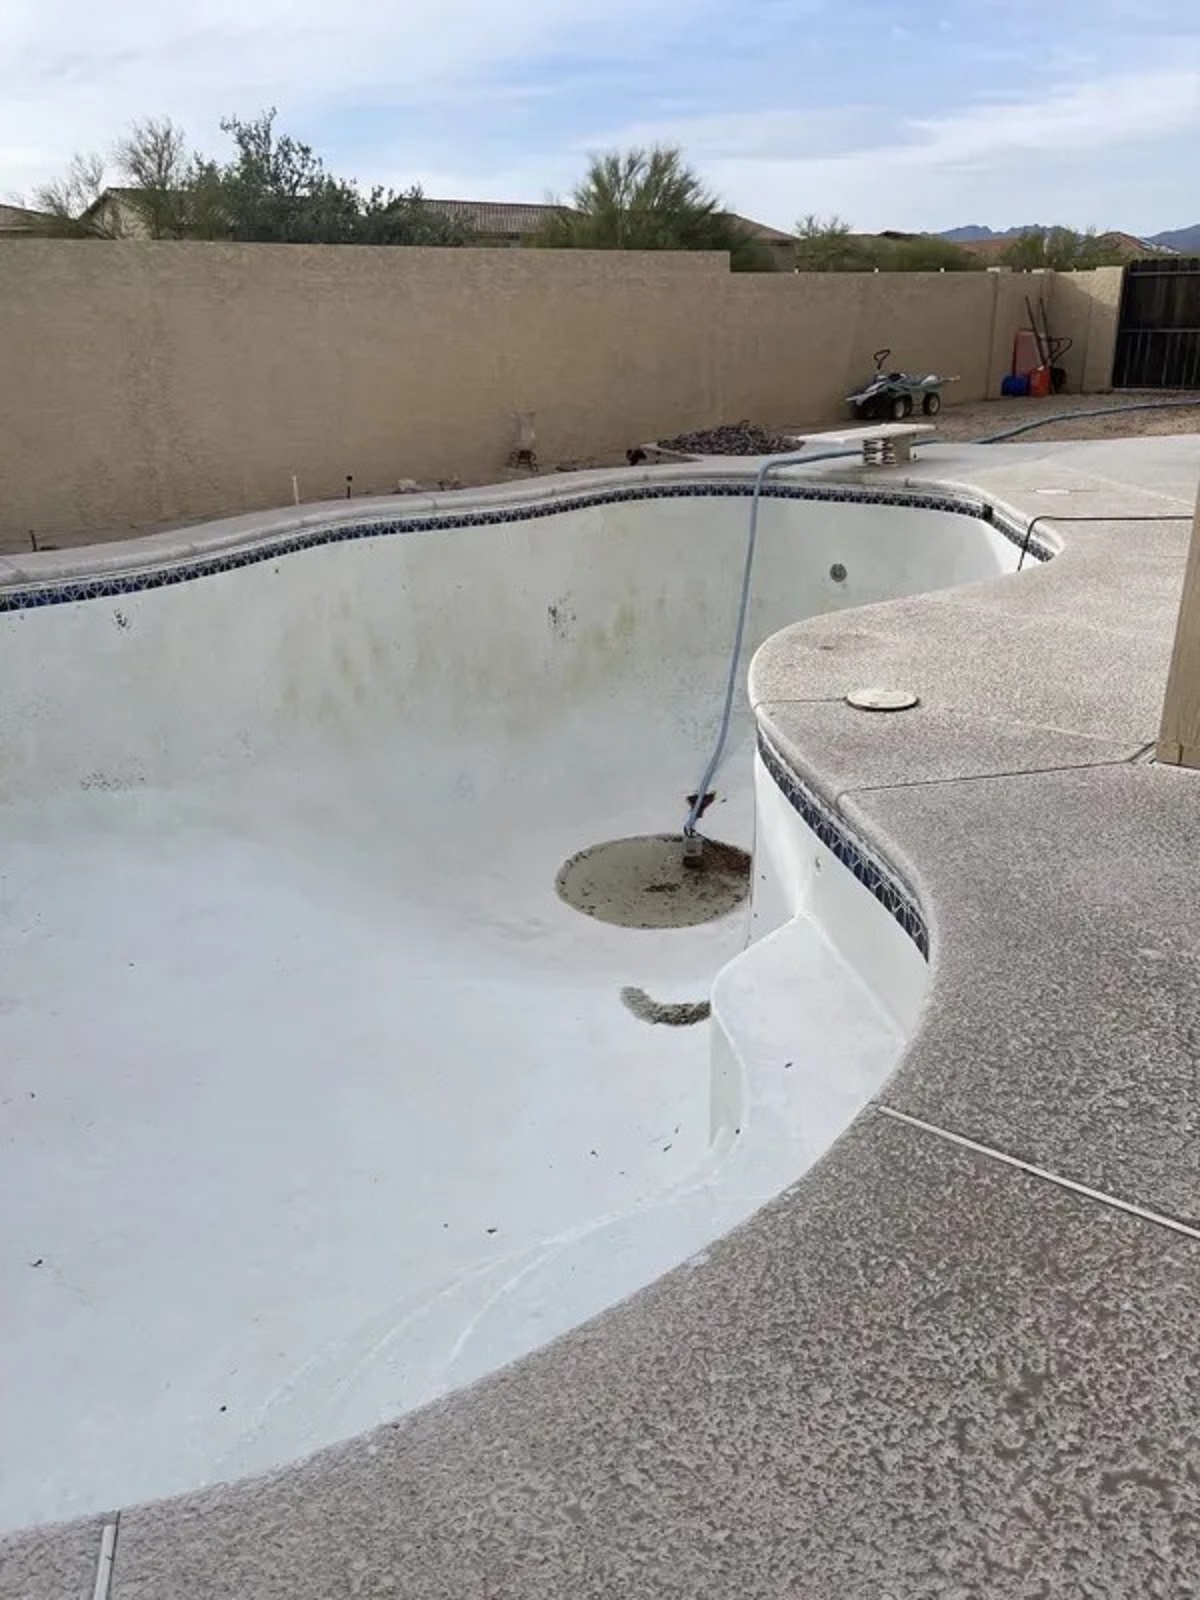 While my family with young kids were staying at this Airbnb, a old man walked into the backyard and started draining the pool…